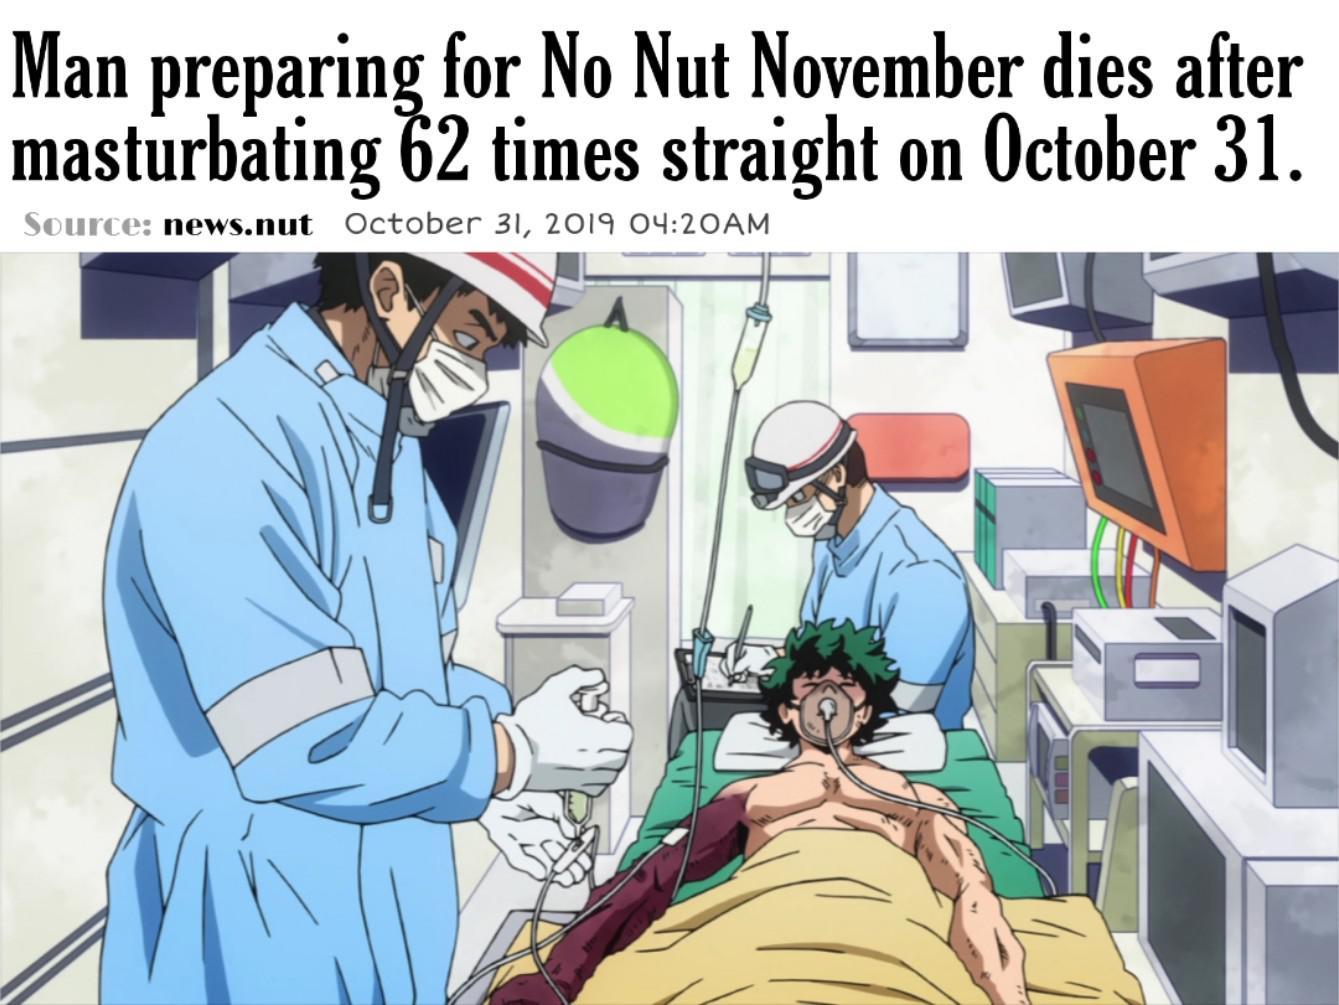 29 Of The Funniest No Nut November Memes We Suddenly Had Plenty Of Free Time To Find